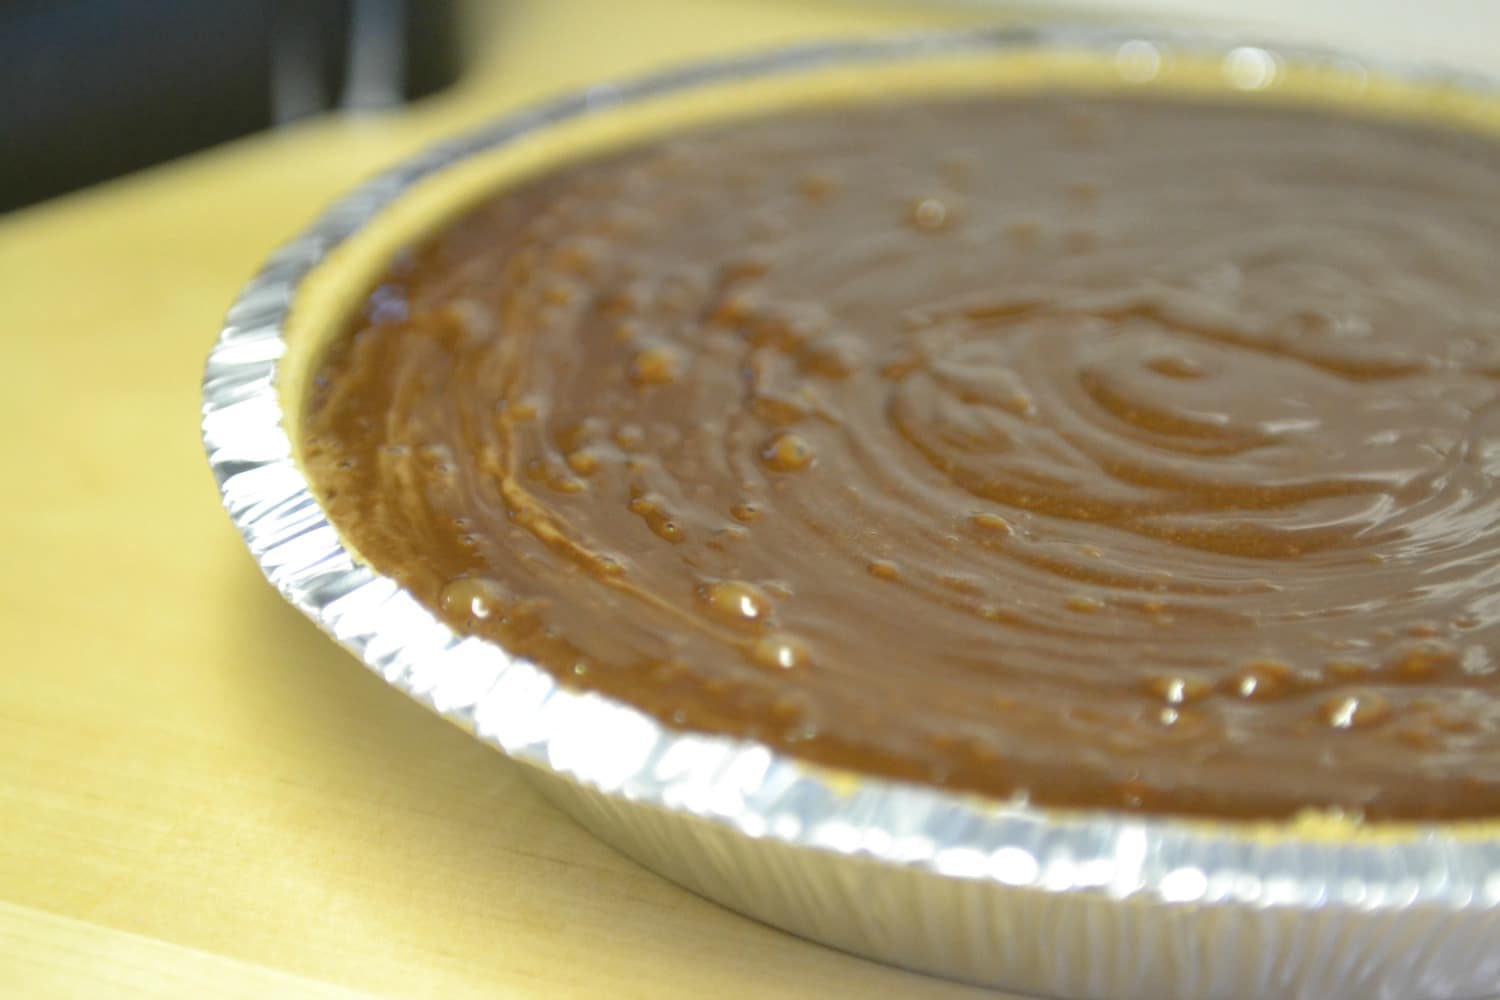 Make life easy by purchasing an store-bought crust for this simple chocolate tart! 